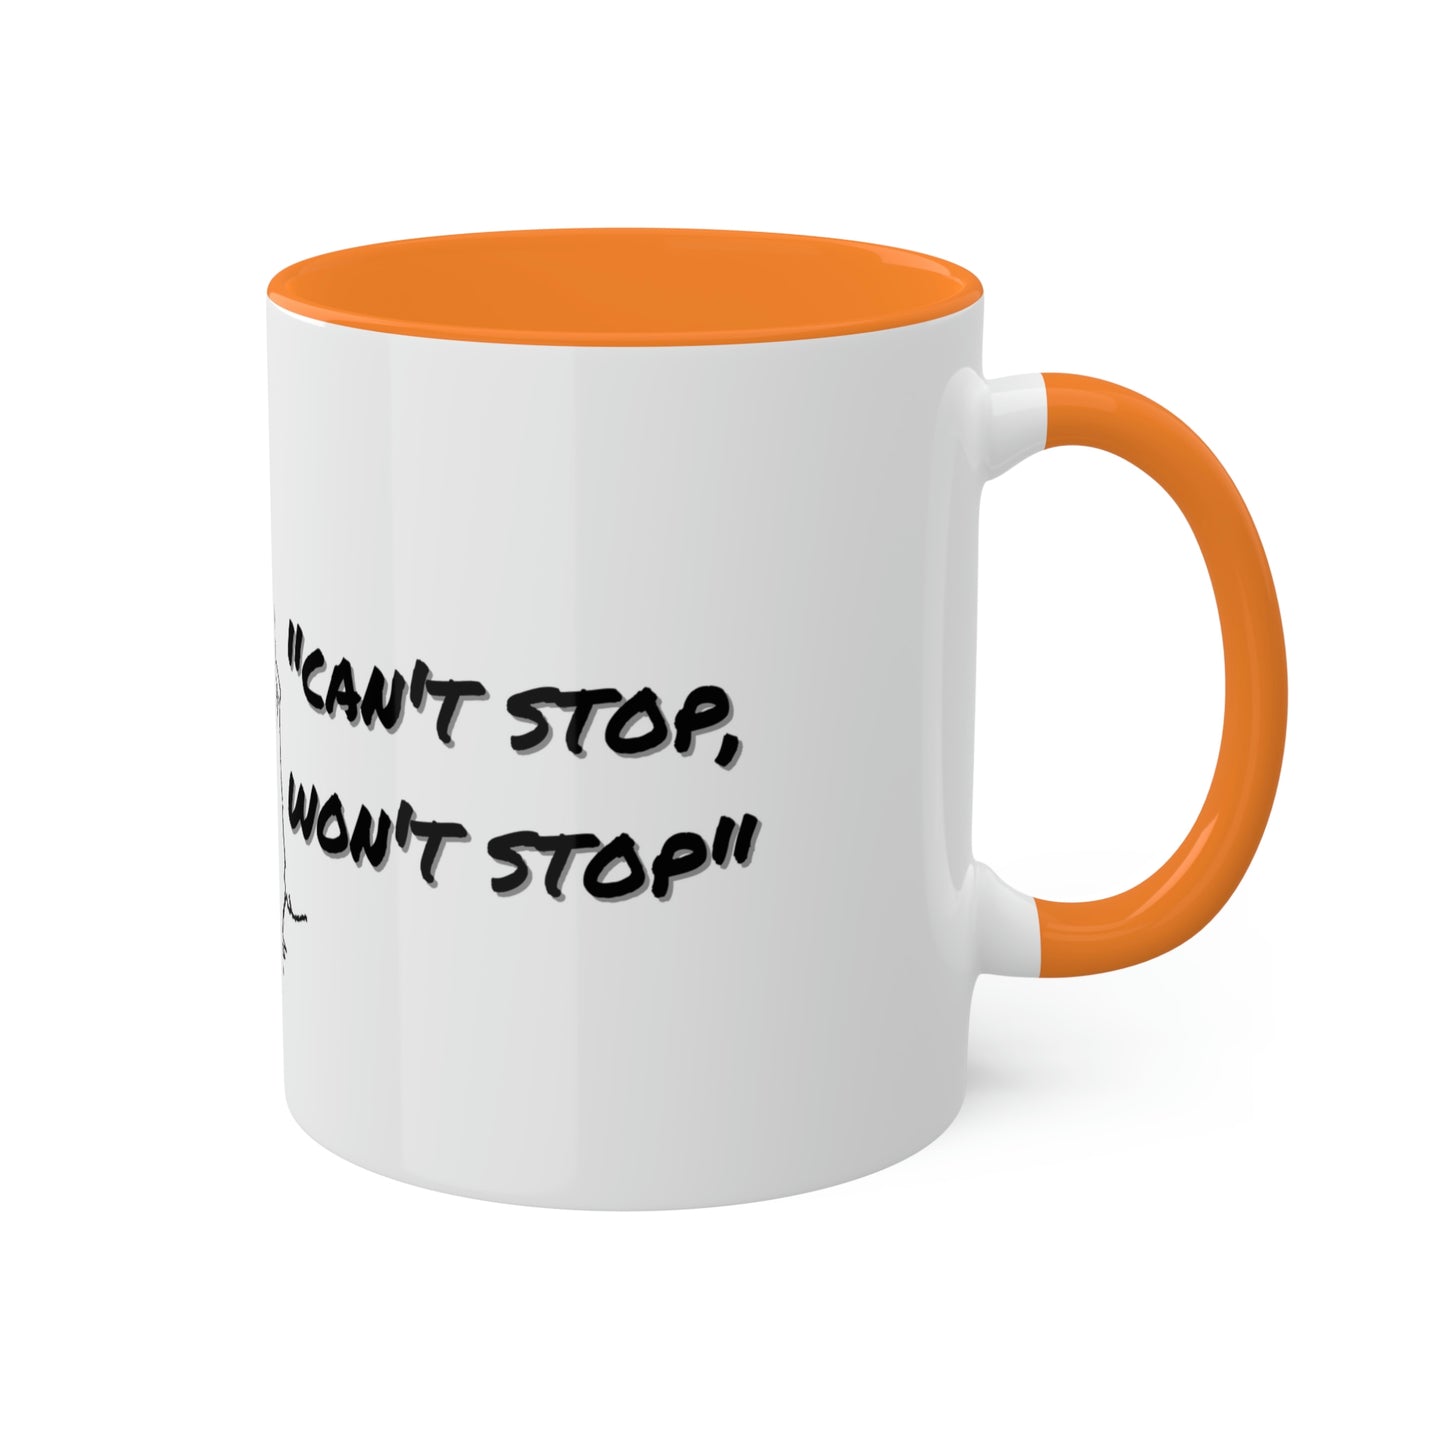 P Diddy #Love #CantStopWontStop - Colorful Mugs, 11oz